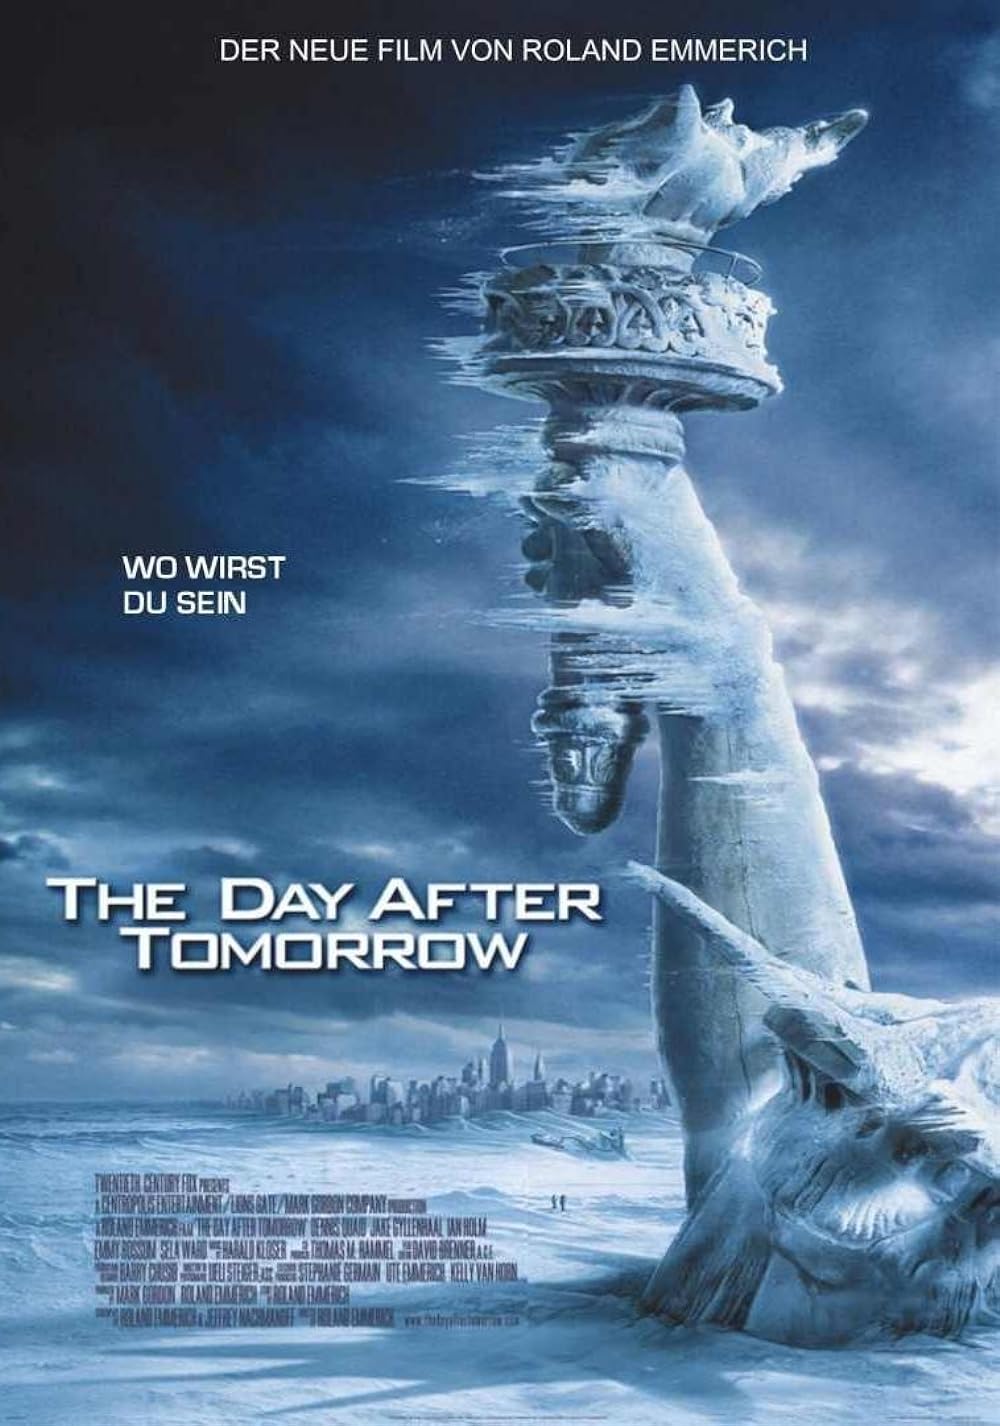 The Day After Tomorrow (2004) 448Kbps 23.976Fps 48Khz 5.1Ch DVD Turkish Audio TAC